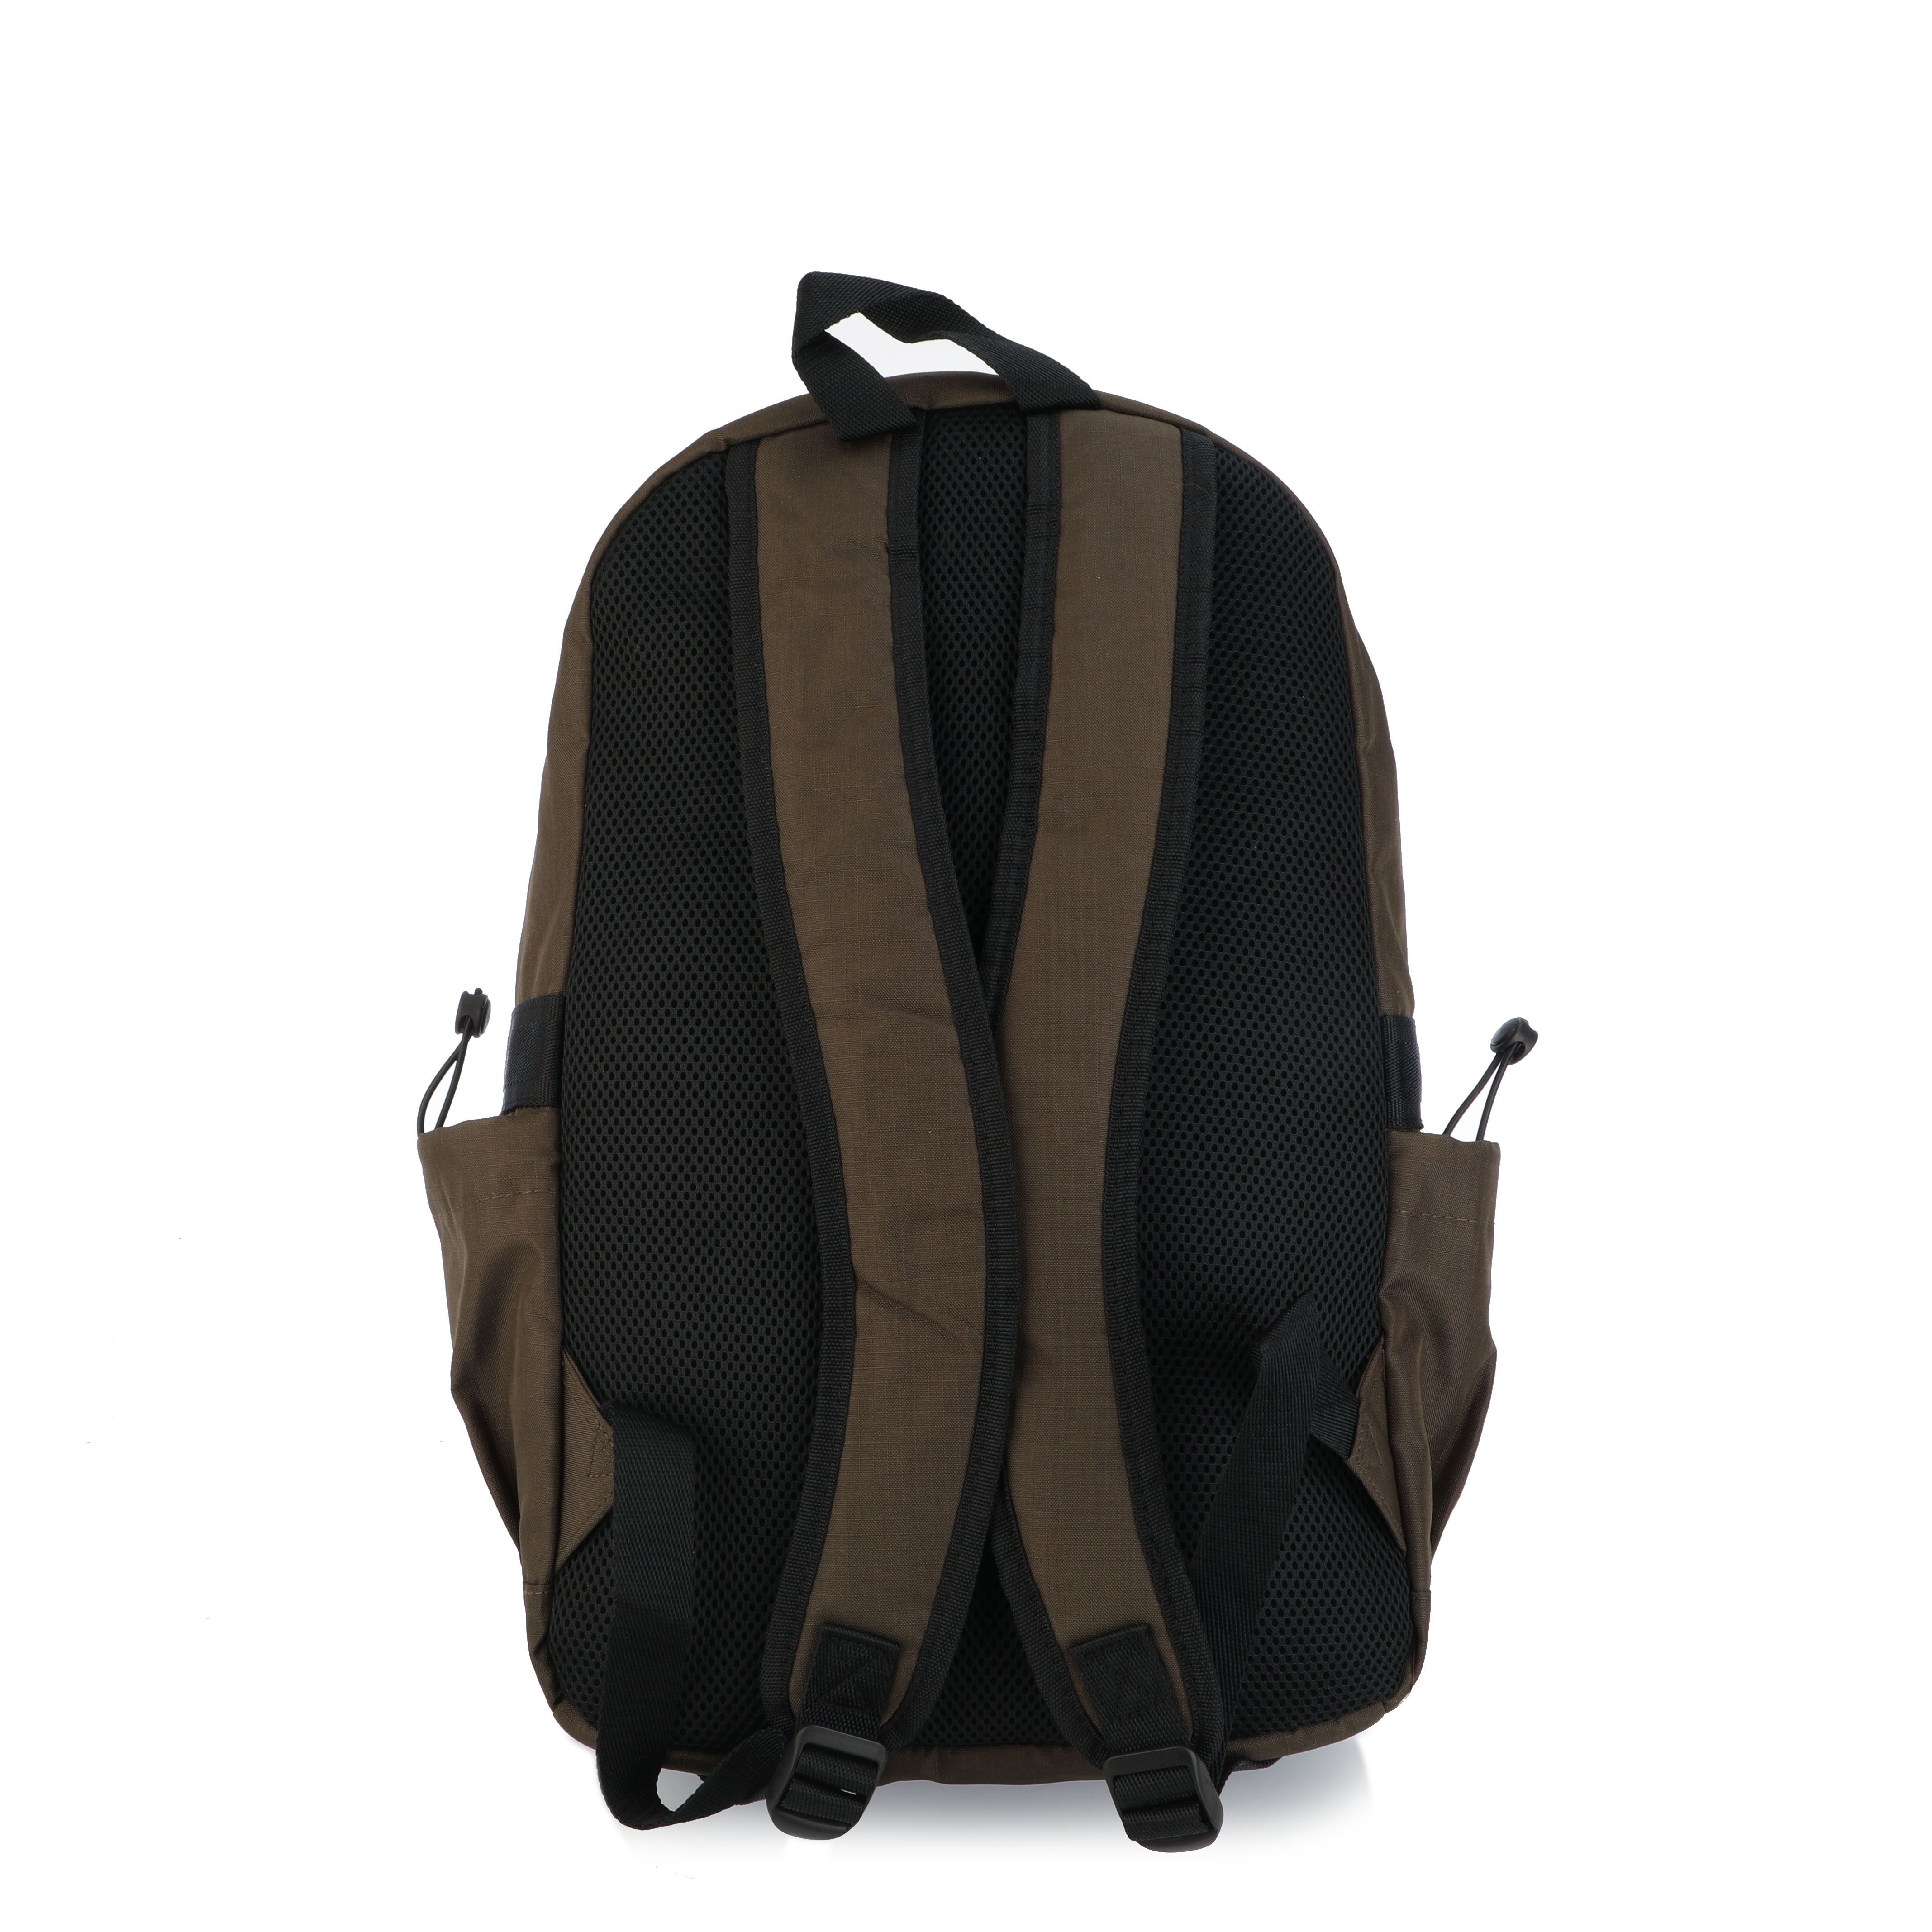 Mens Lyle and Scott Recycled Ripstop Backpack in olive.- Two-way zipper.- Adjustable pocket composition.- Iconic Golden Eagle adorning the front panel of the backpack.- Laptop compartment.- Body: 100% Polyester (Recycled). Lining: 100% Polyester (Recycled).- Ref: BA1500AW485